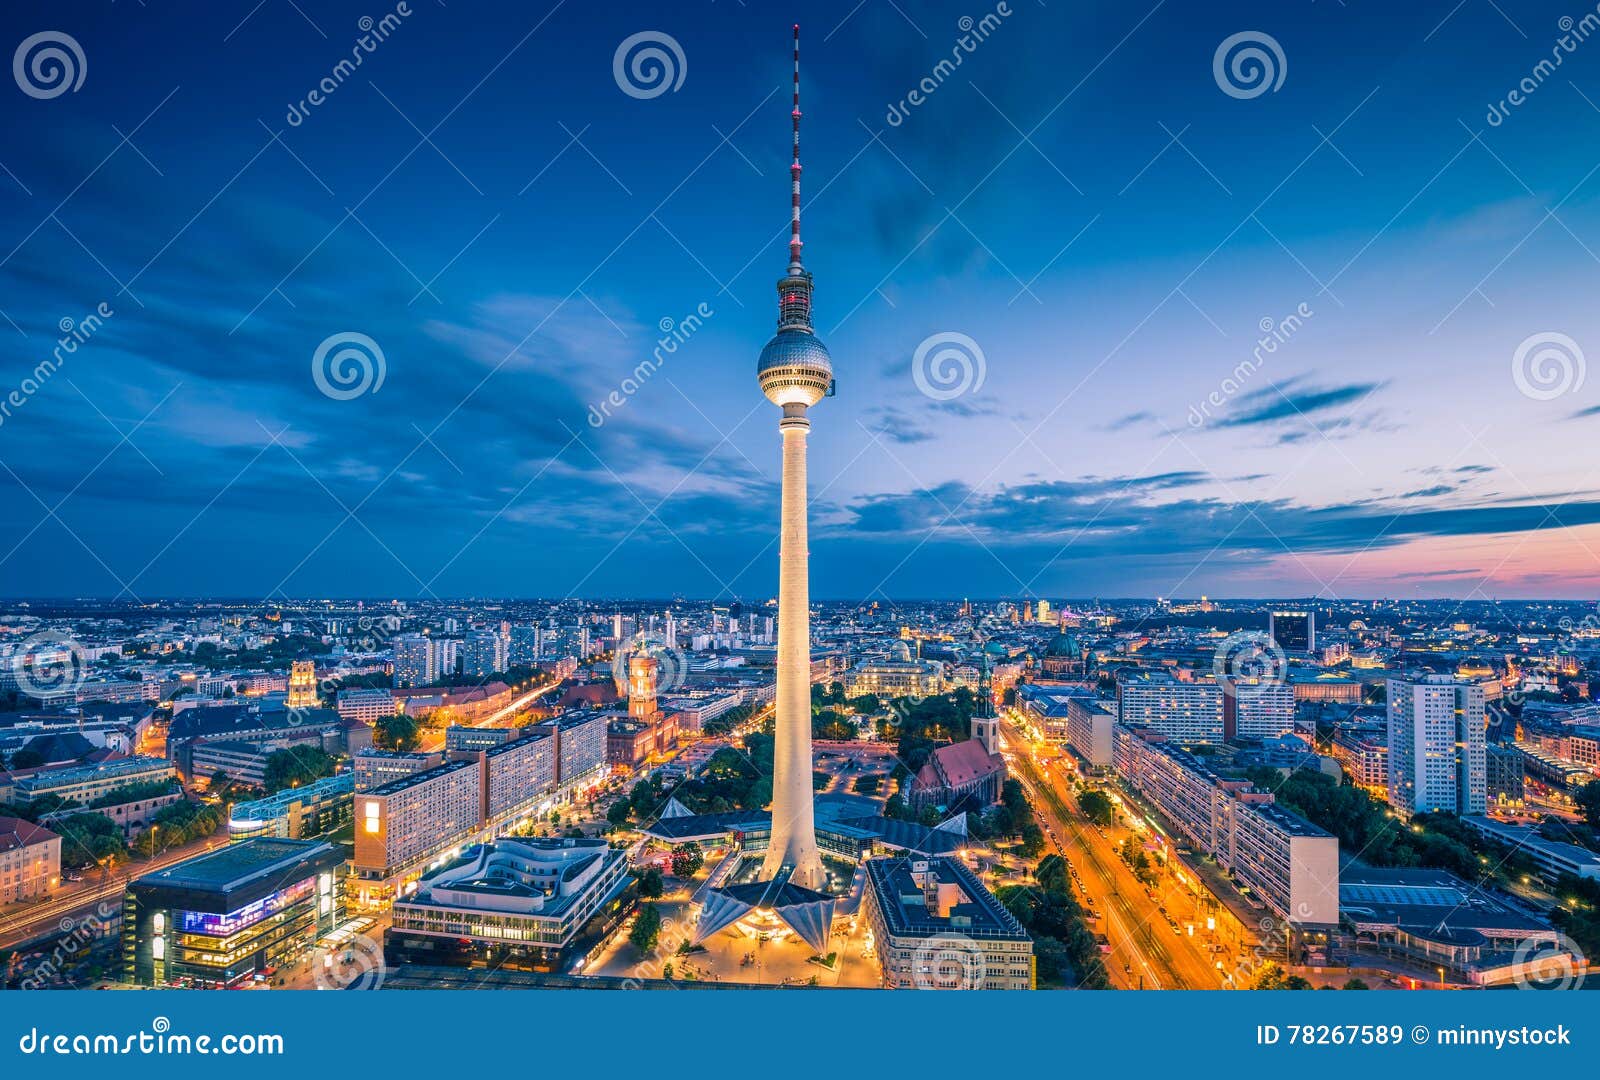 berlin skyline panorama with famous tv tower at alexanderplatz in twilight